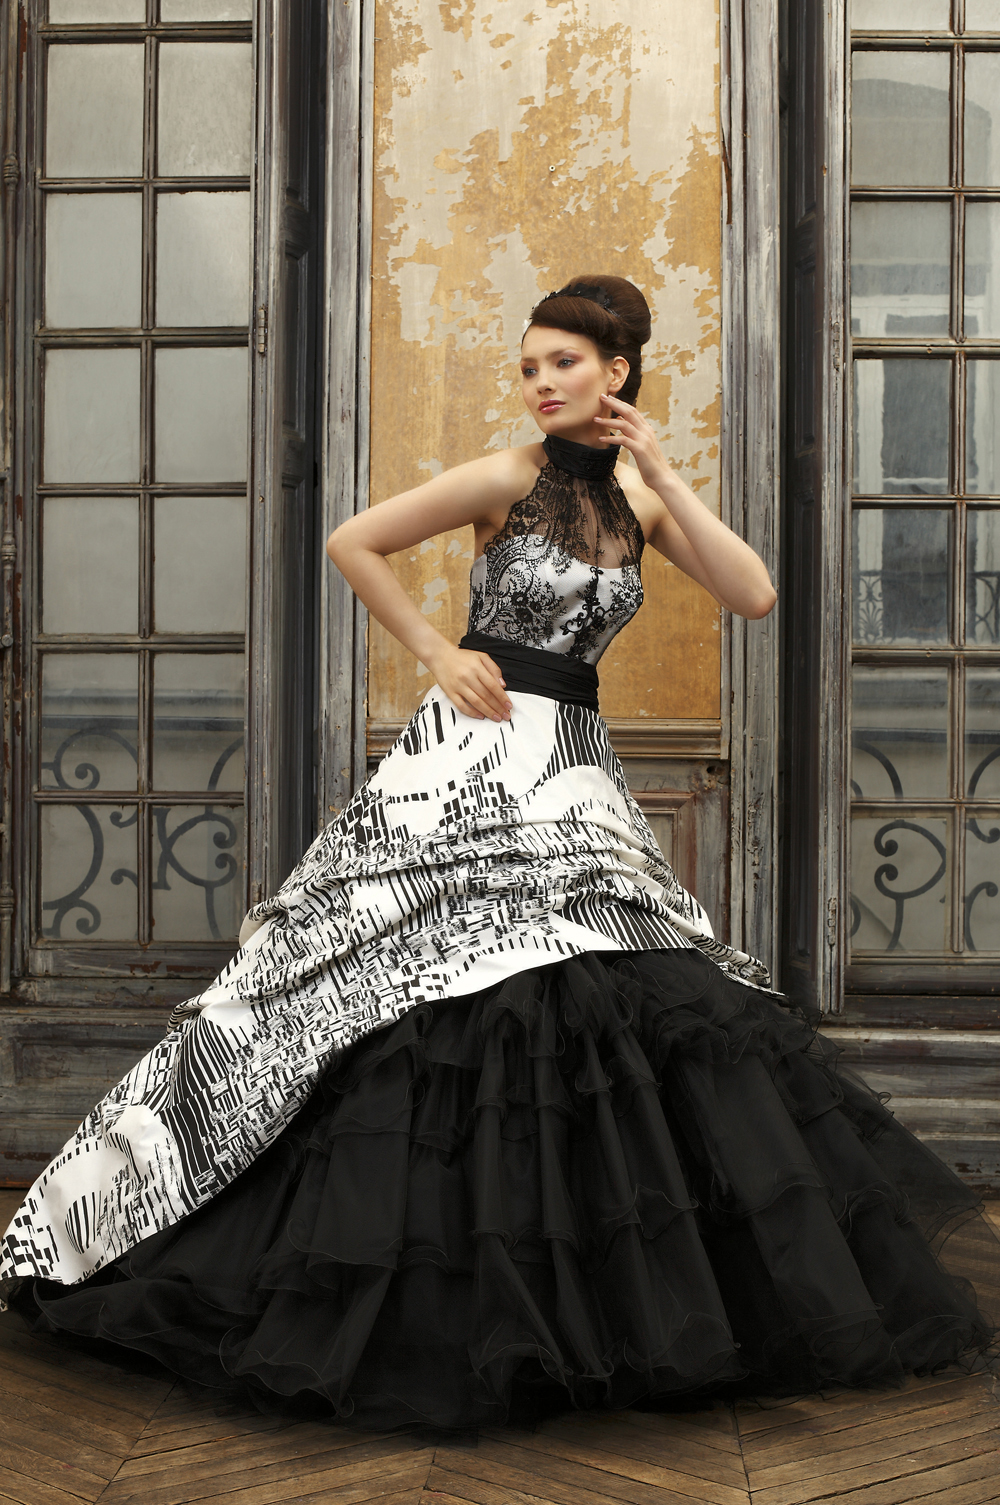 Black and white ball gown wedding dress with halter neck